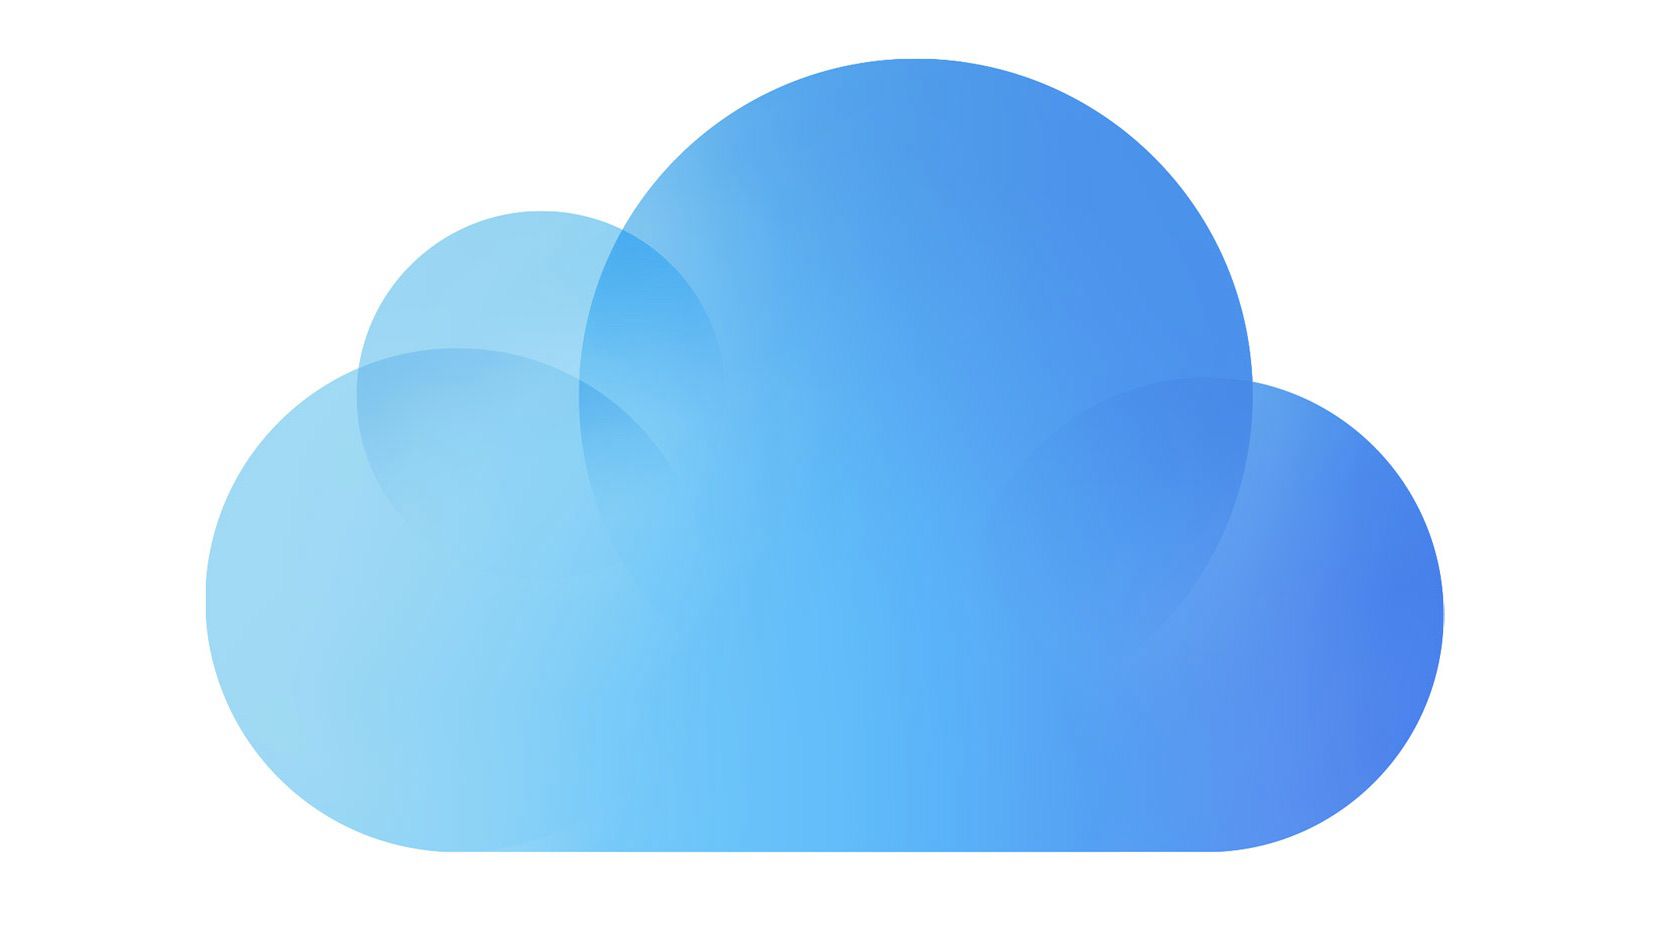 iCloud+ to Let iCloud Mail Users Personalize Their Email Domain Name - MacRumors